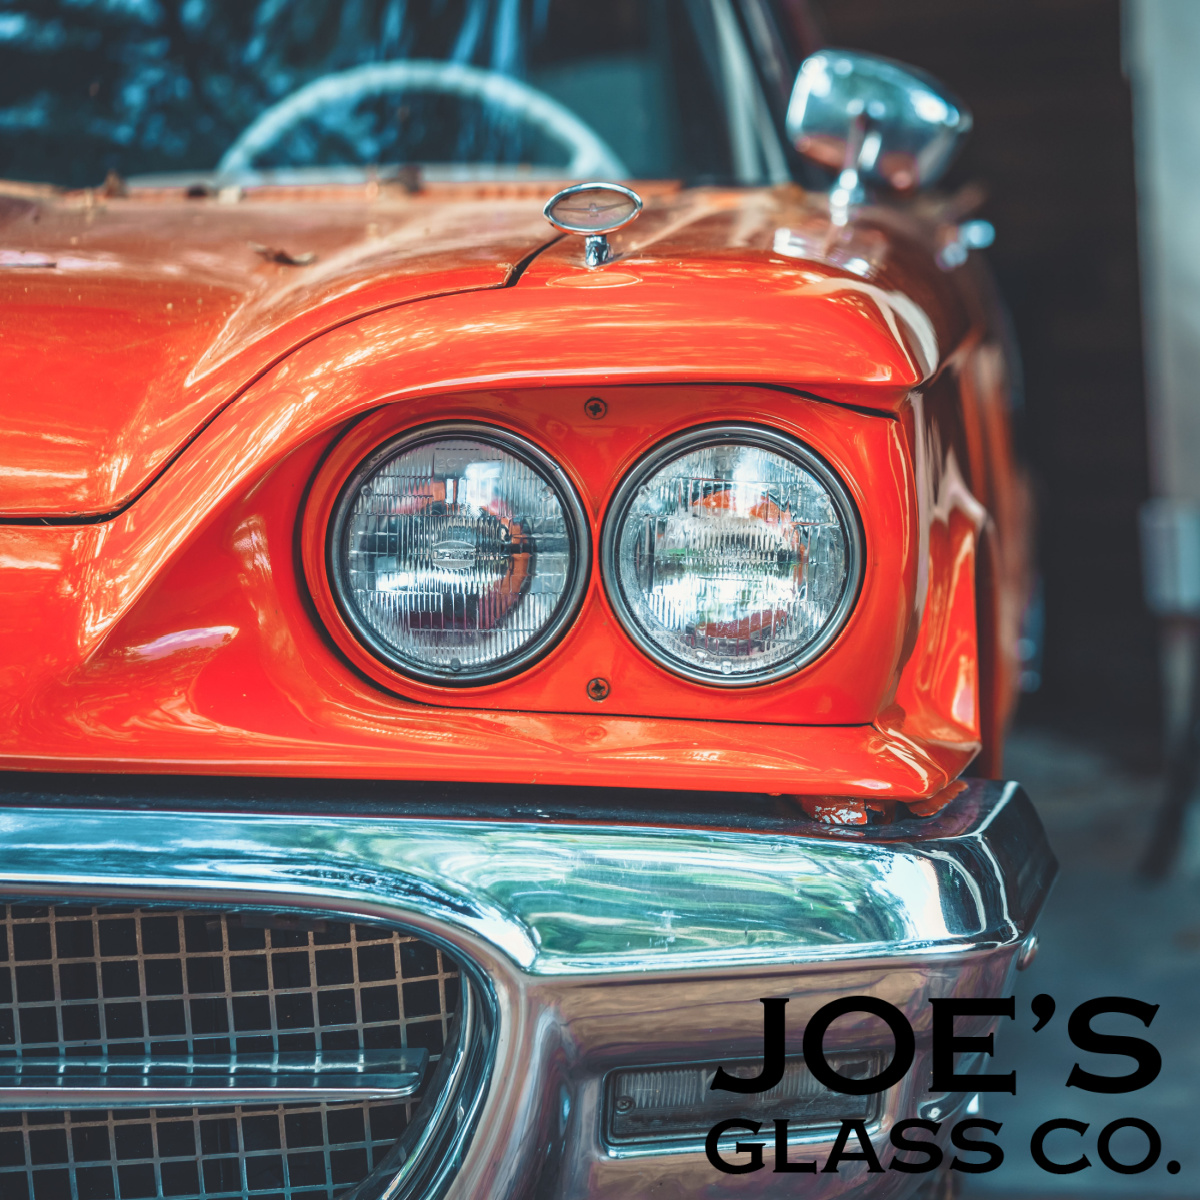 Joe’s Glass Co. for Custom Auto Glass Replacement in and Around Redmond